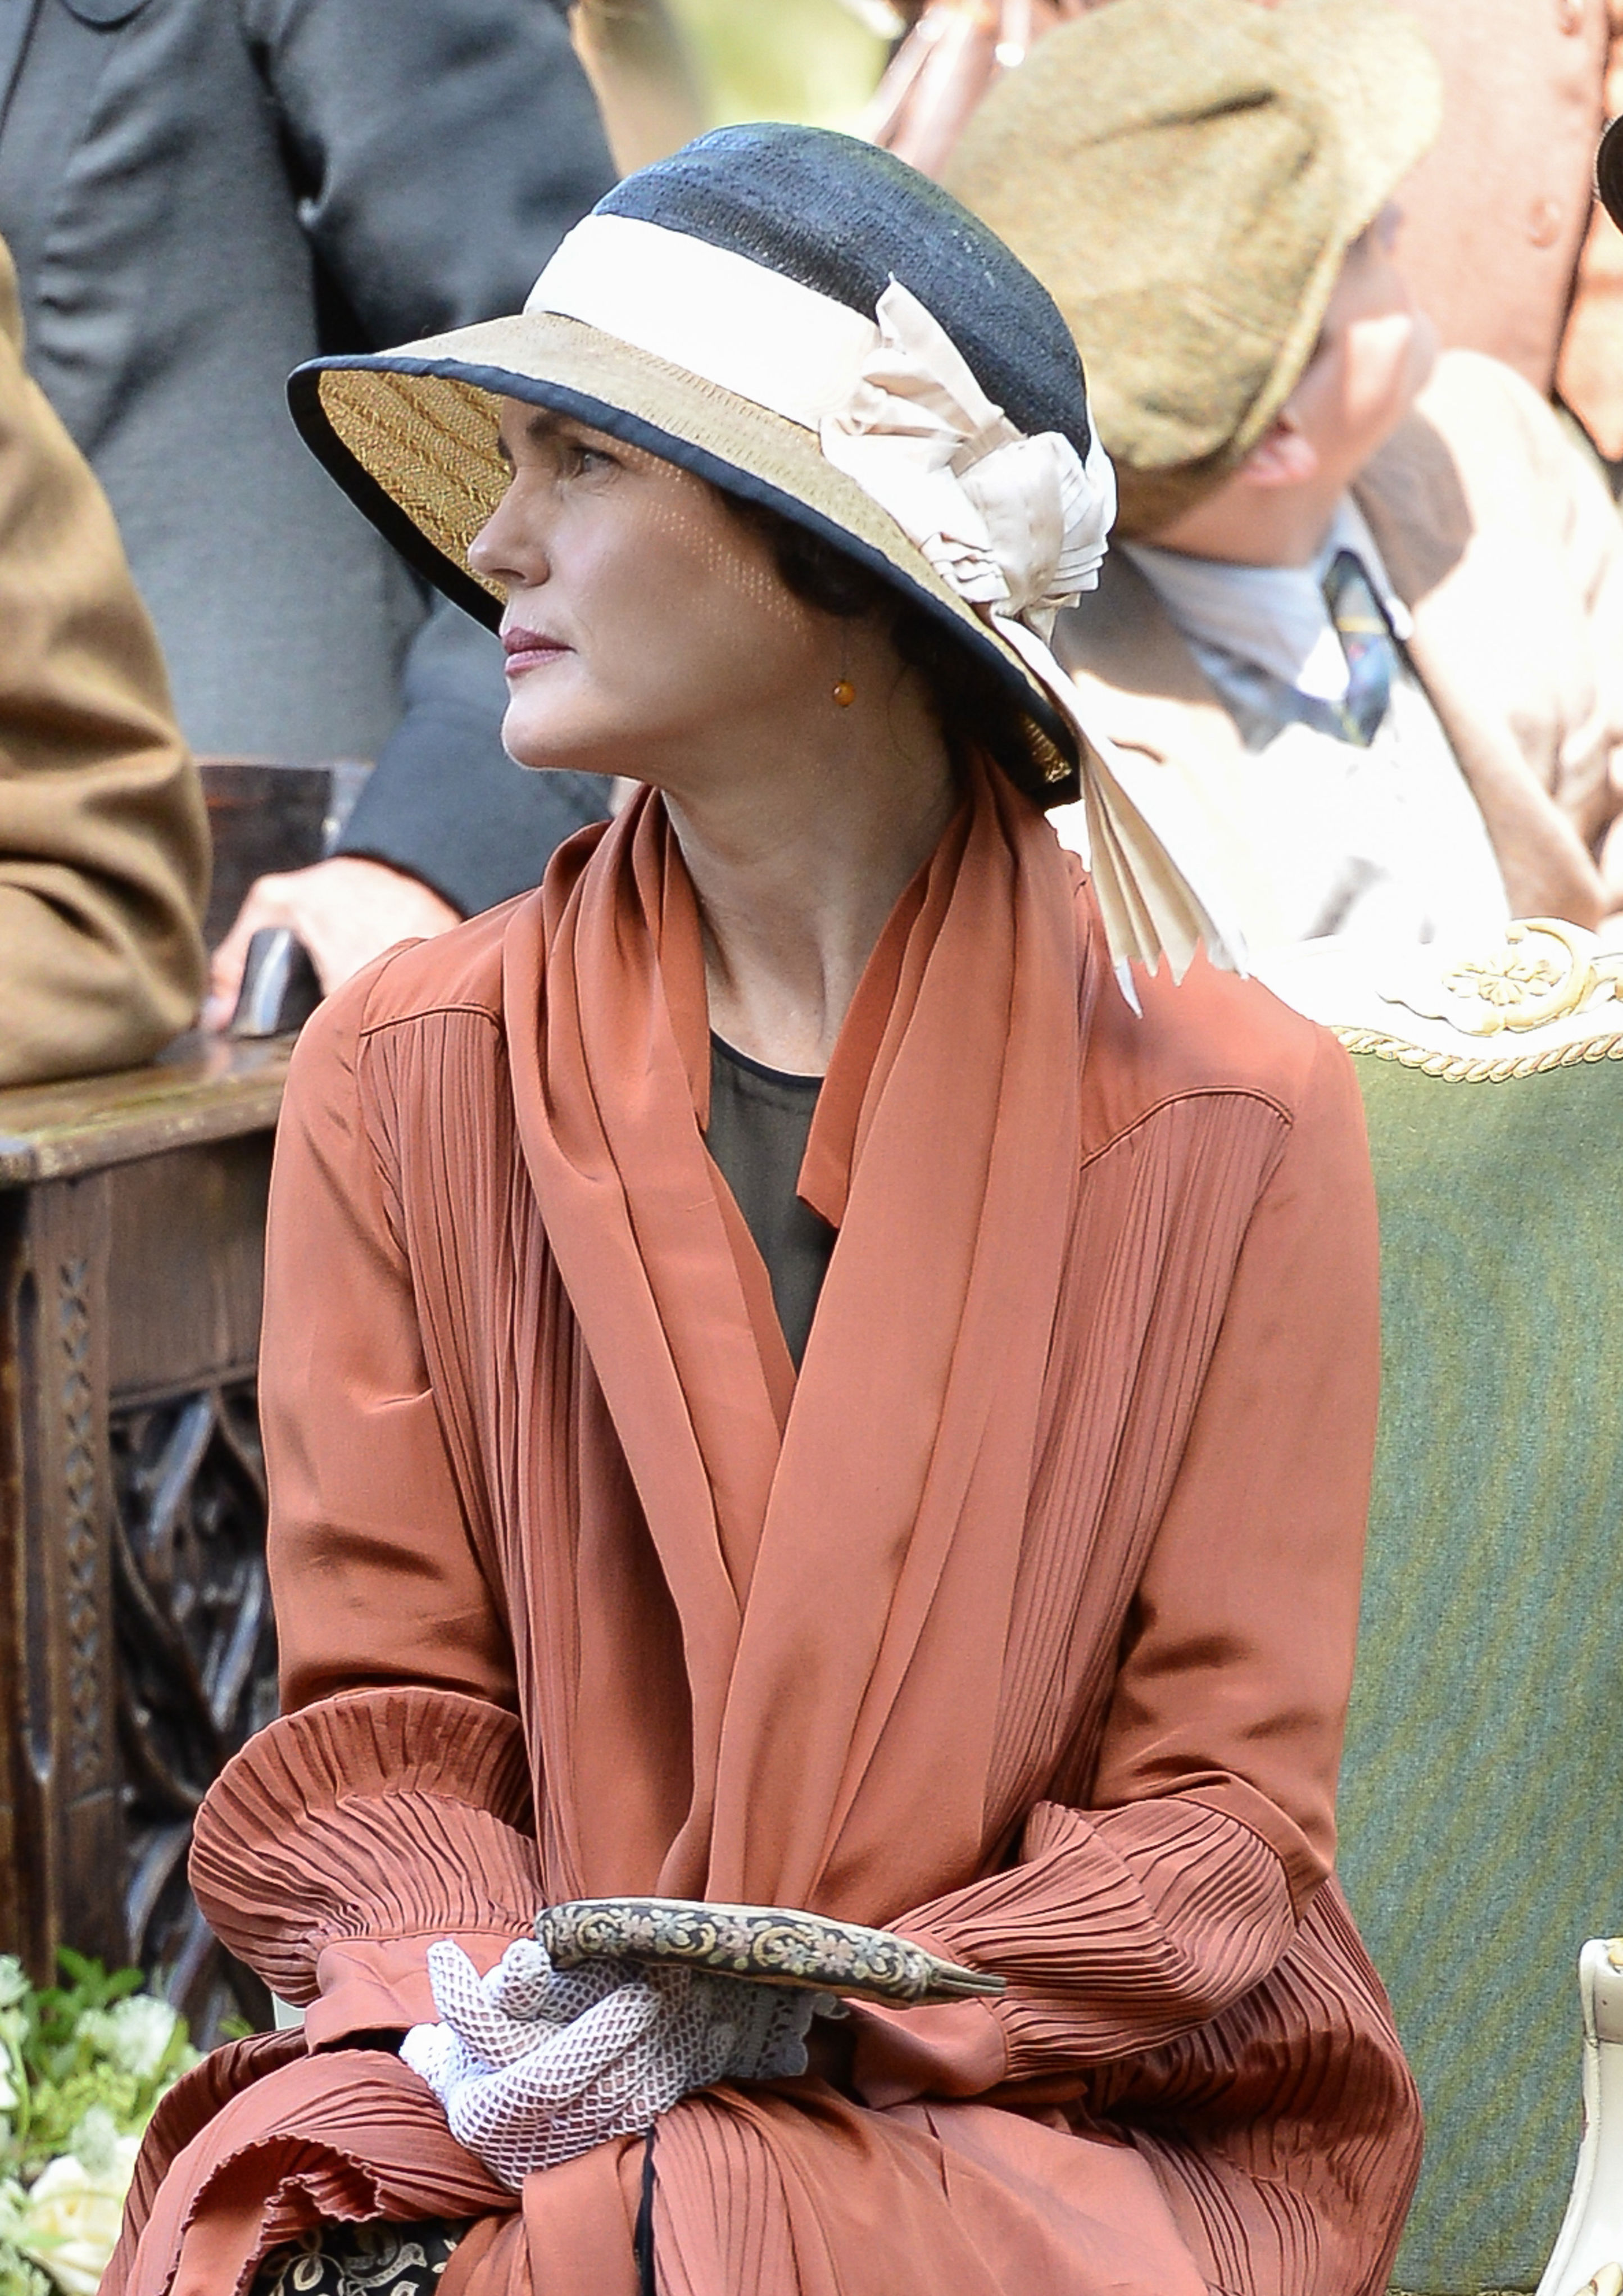 <p>Here's a close-up look at one of the hats and a gorgeous pleated coral day coat worn by Elizabeth McGovern (as Lady Cora) while filming the "Downton Abbey" series in Oxfordshire, England, in 2014.</p>